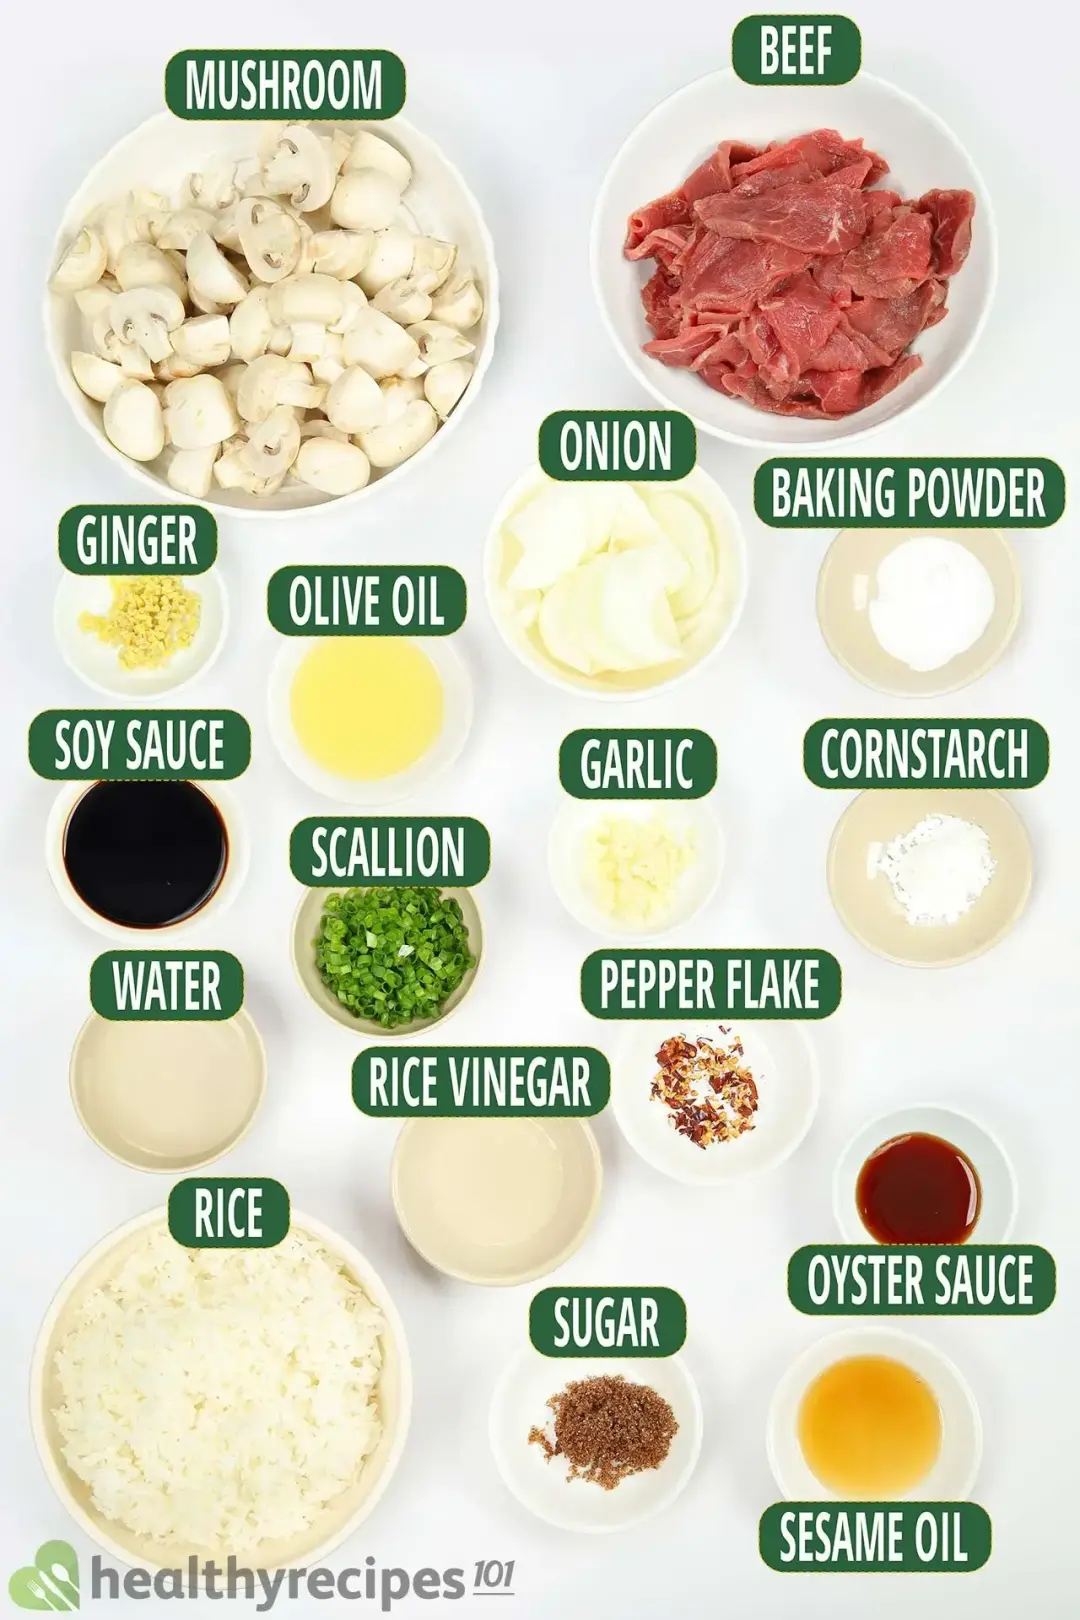 Ingredients for Beef and Mushrooms